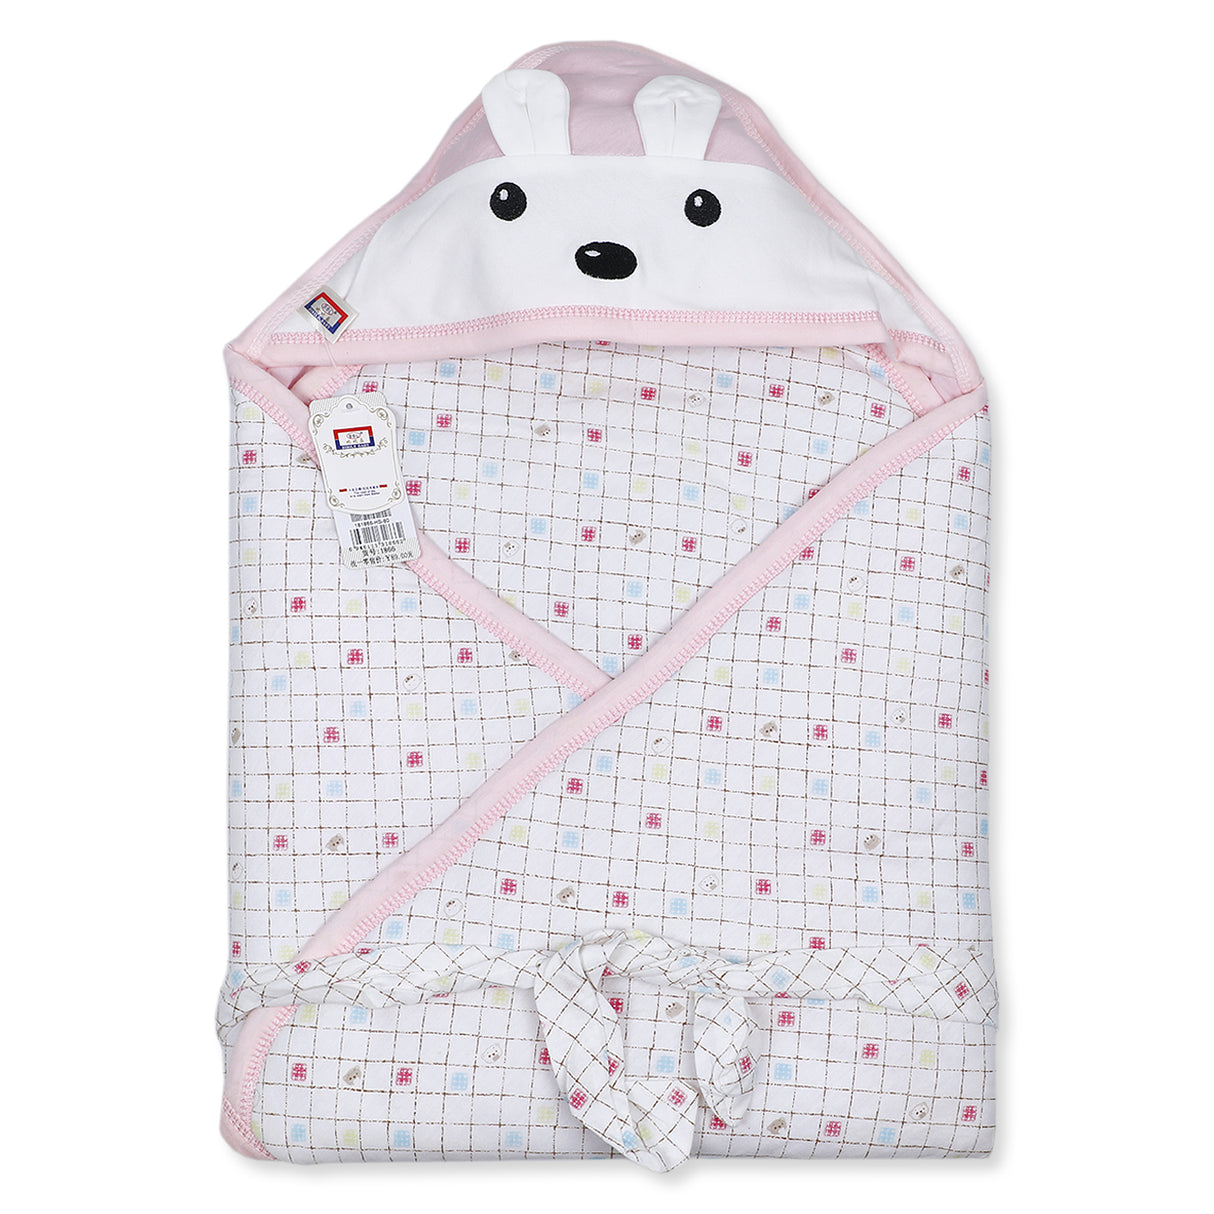 Bunny Face Soft And Comfy Hooded Wrapper